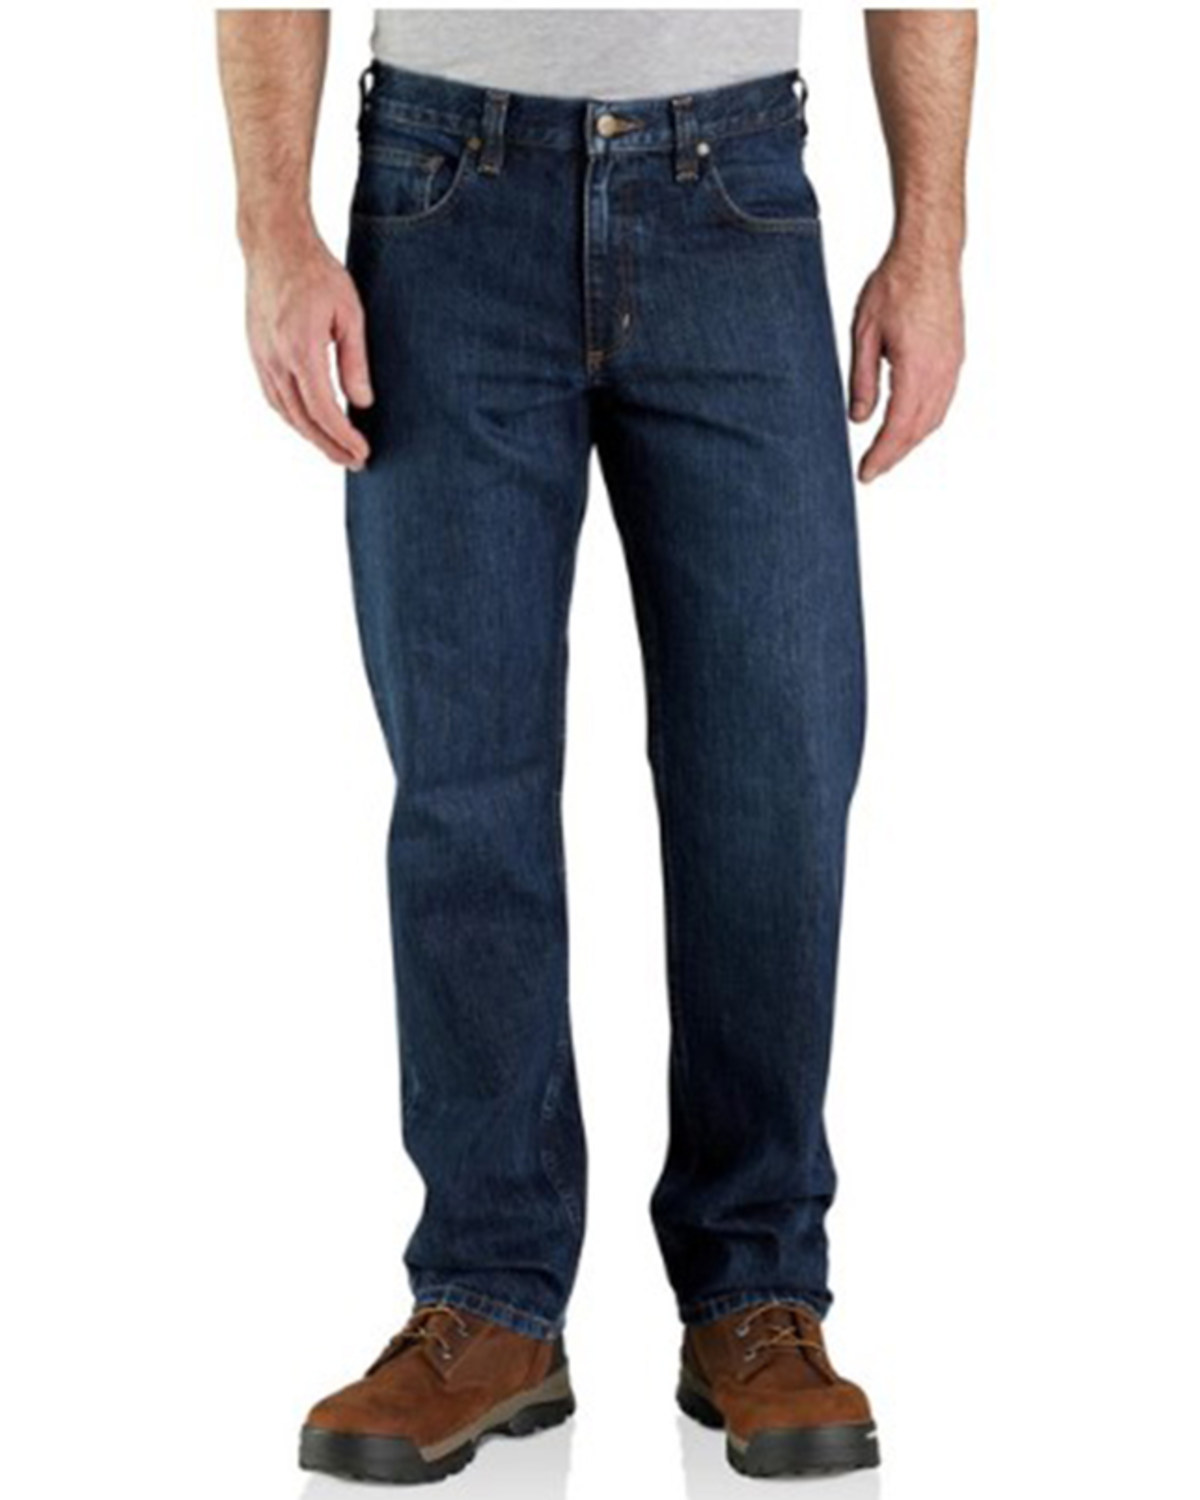 Carhartt Men's Relaxed Fit Work Jeans